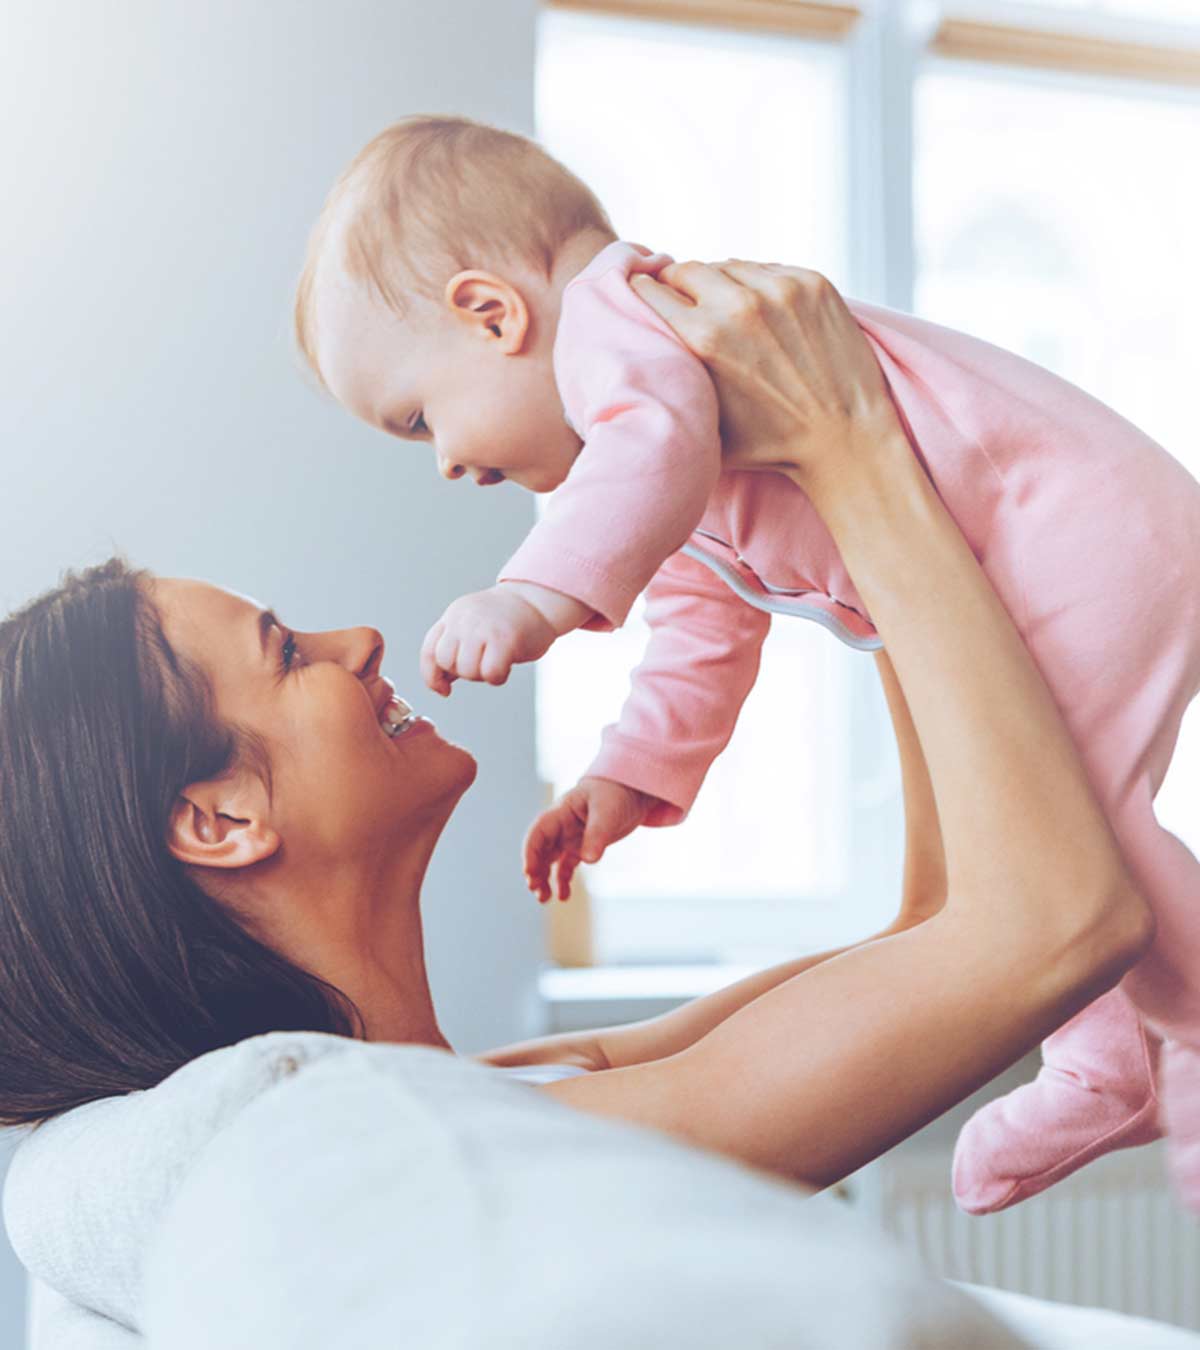 Baby Wants To Be Held All The Time: Reasons & Ways to Stop It